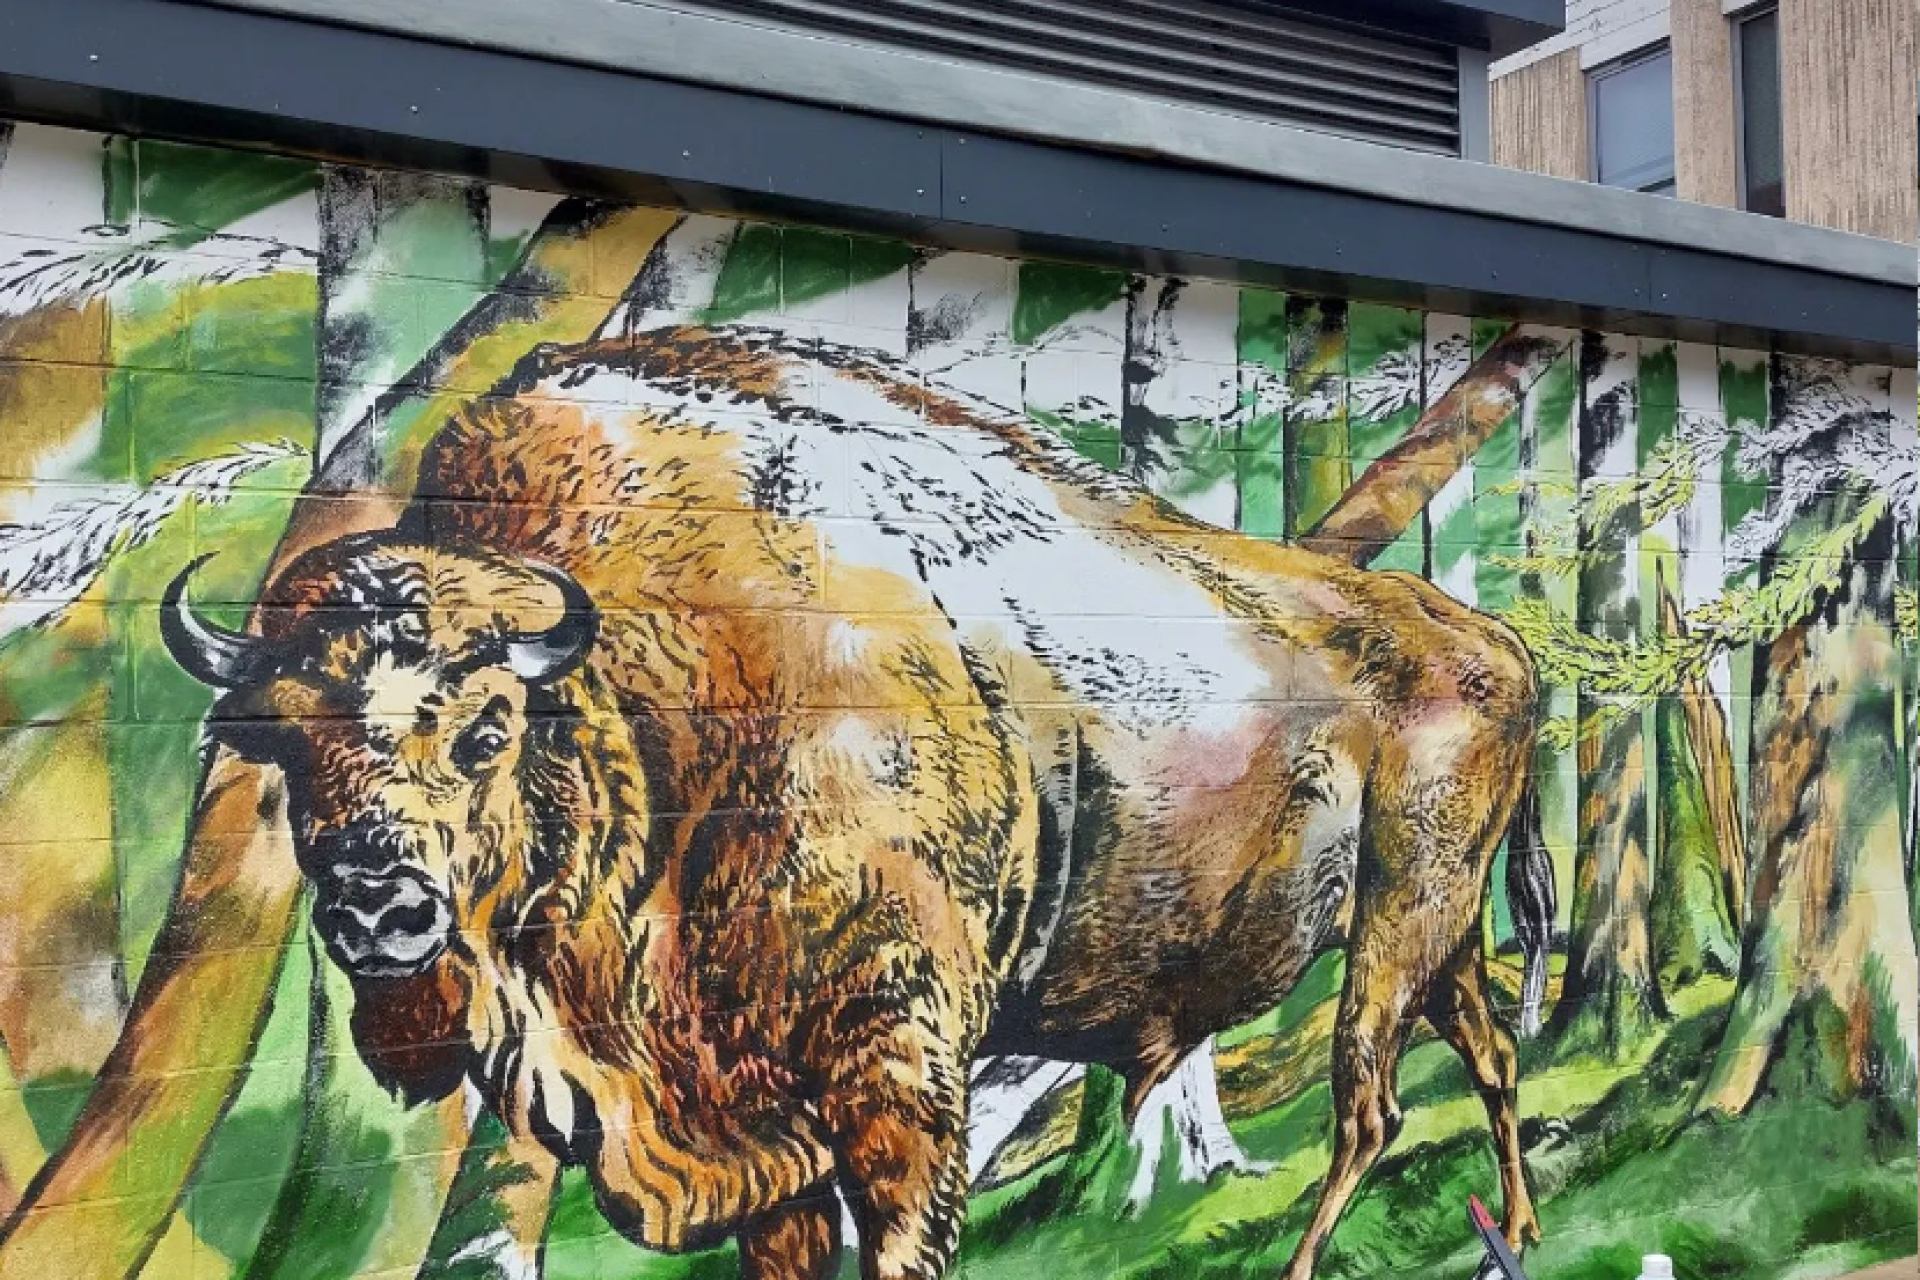 A bison mural.